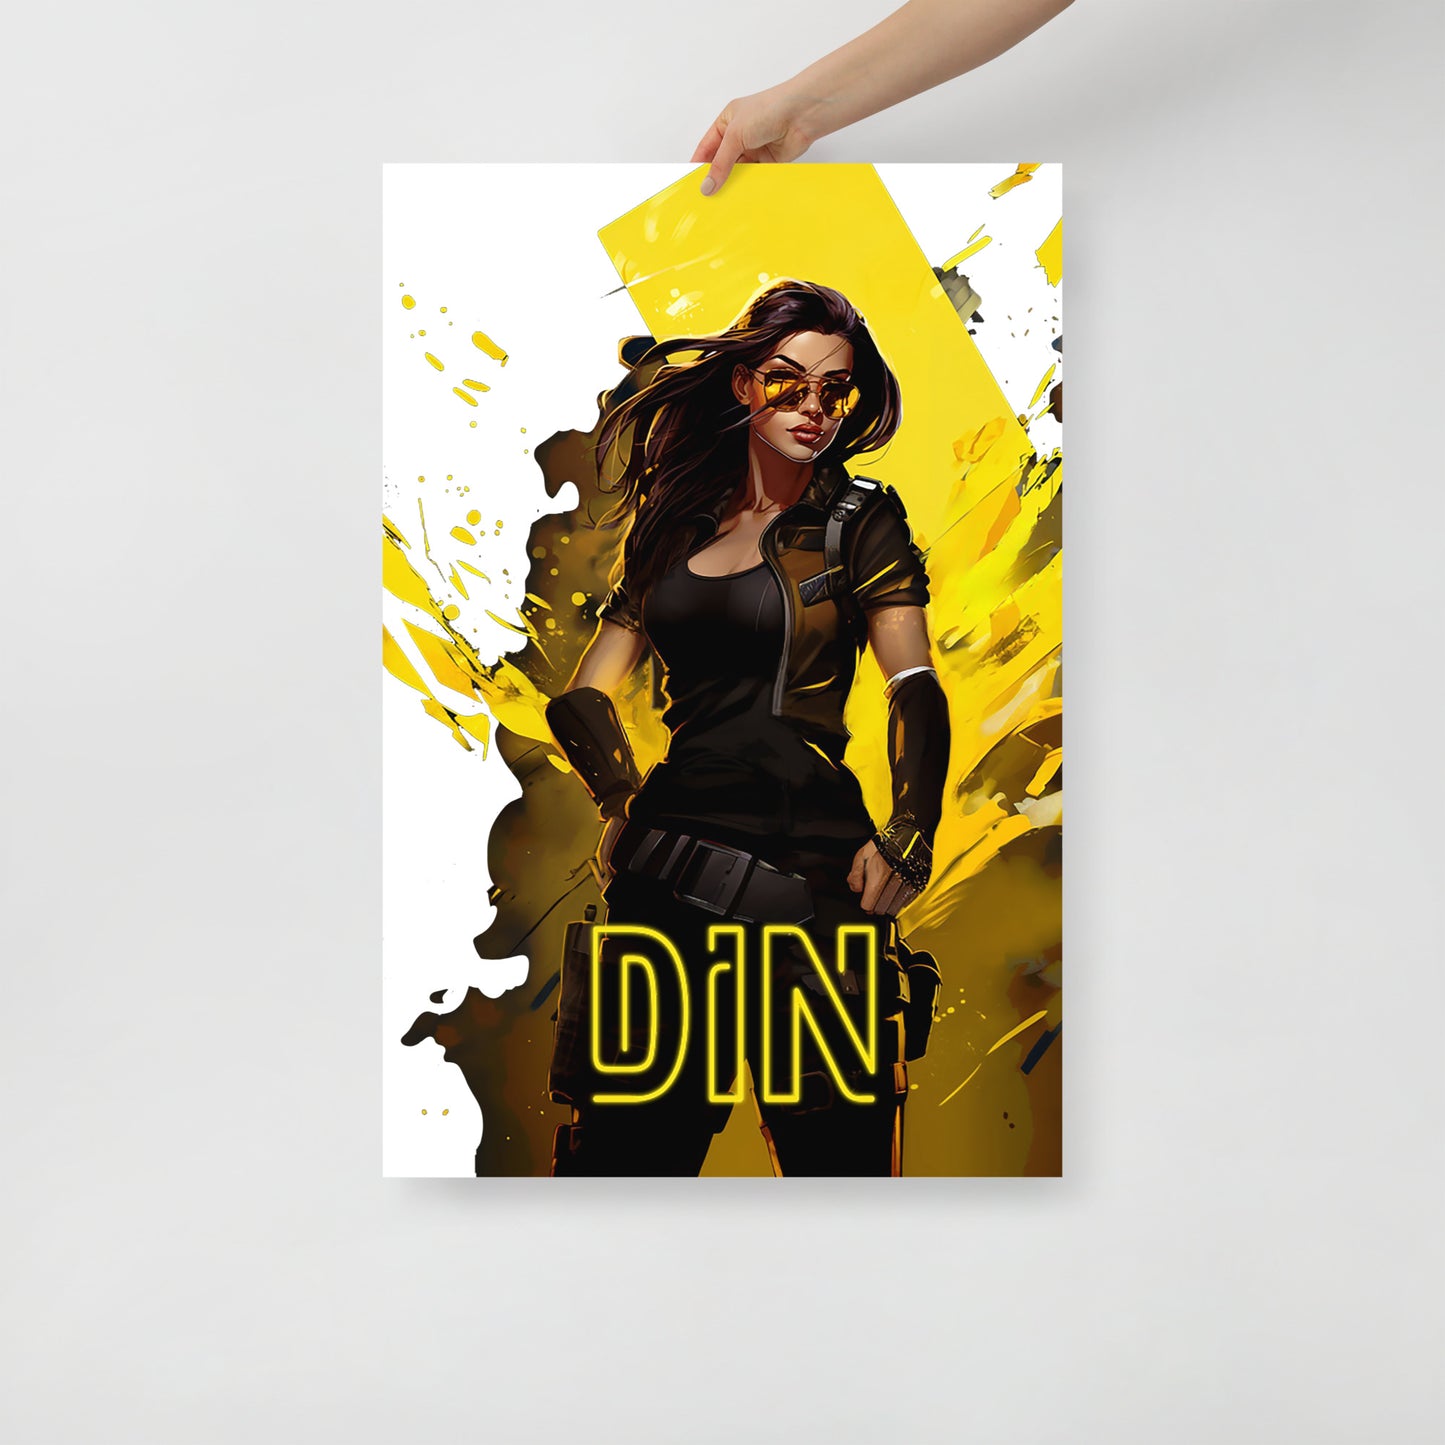 DIN Unruly - Poster